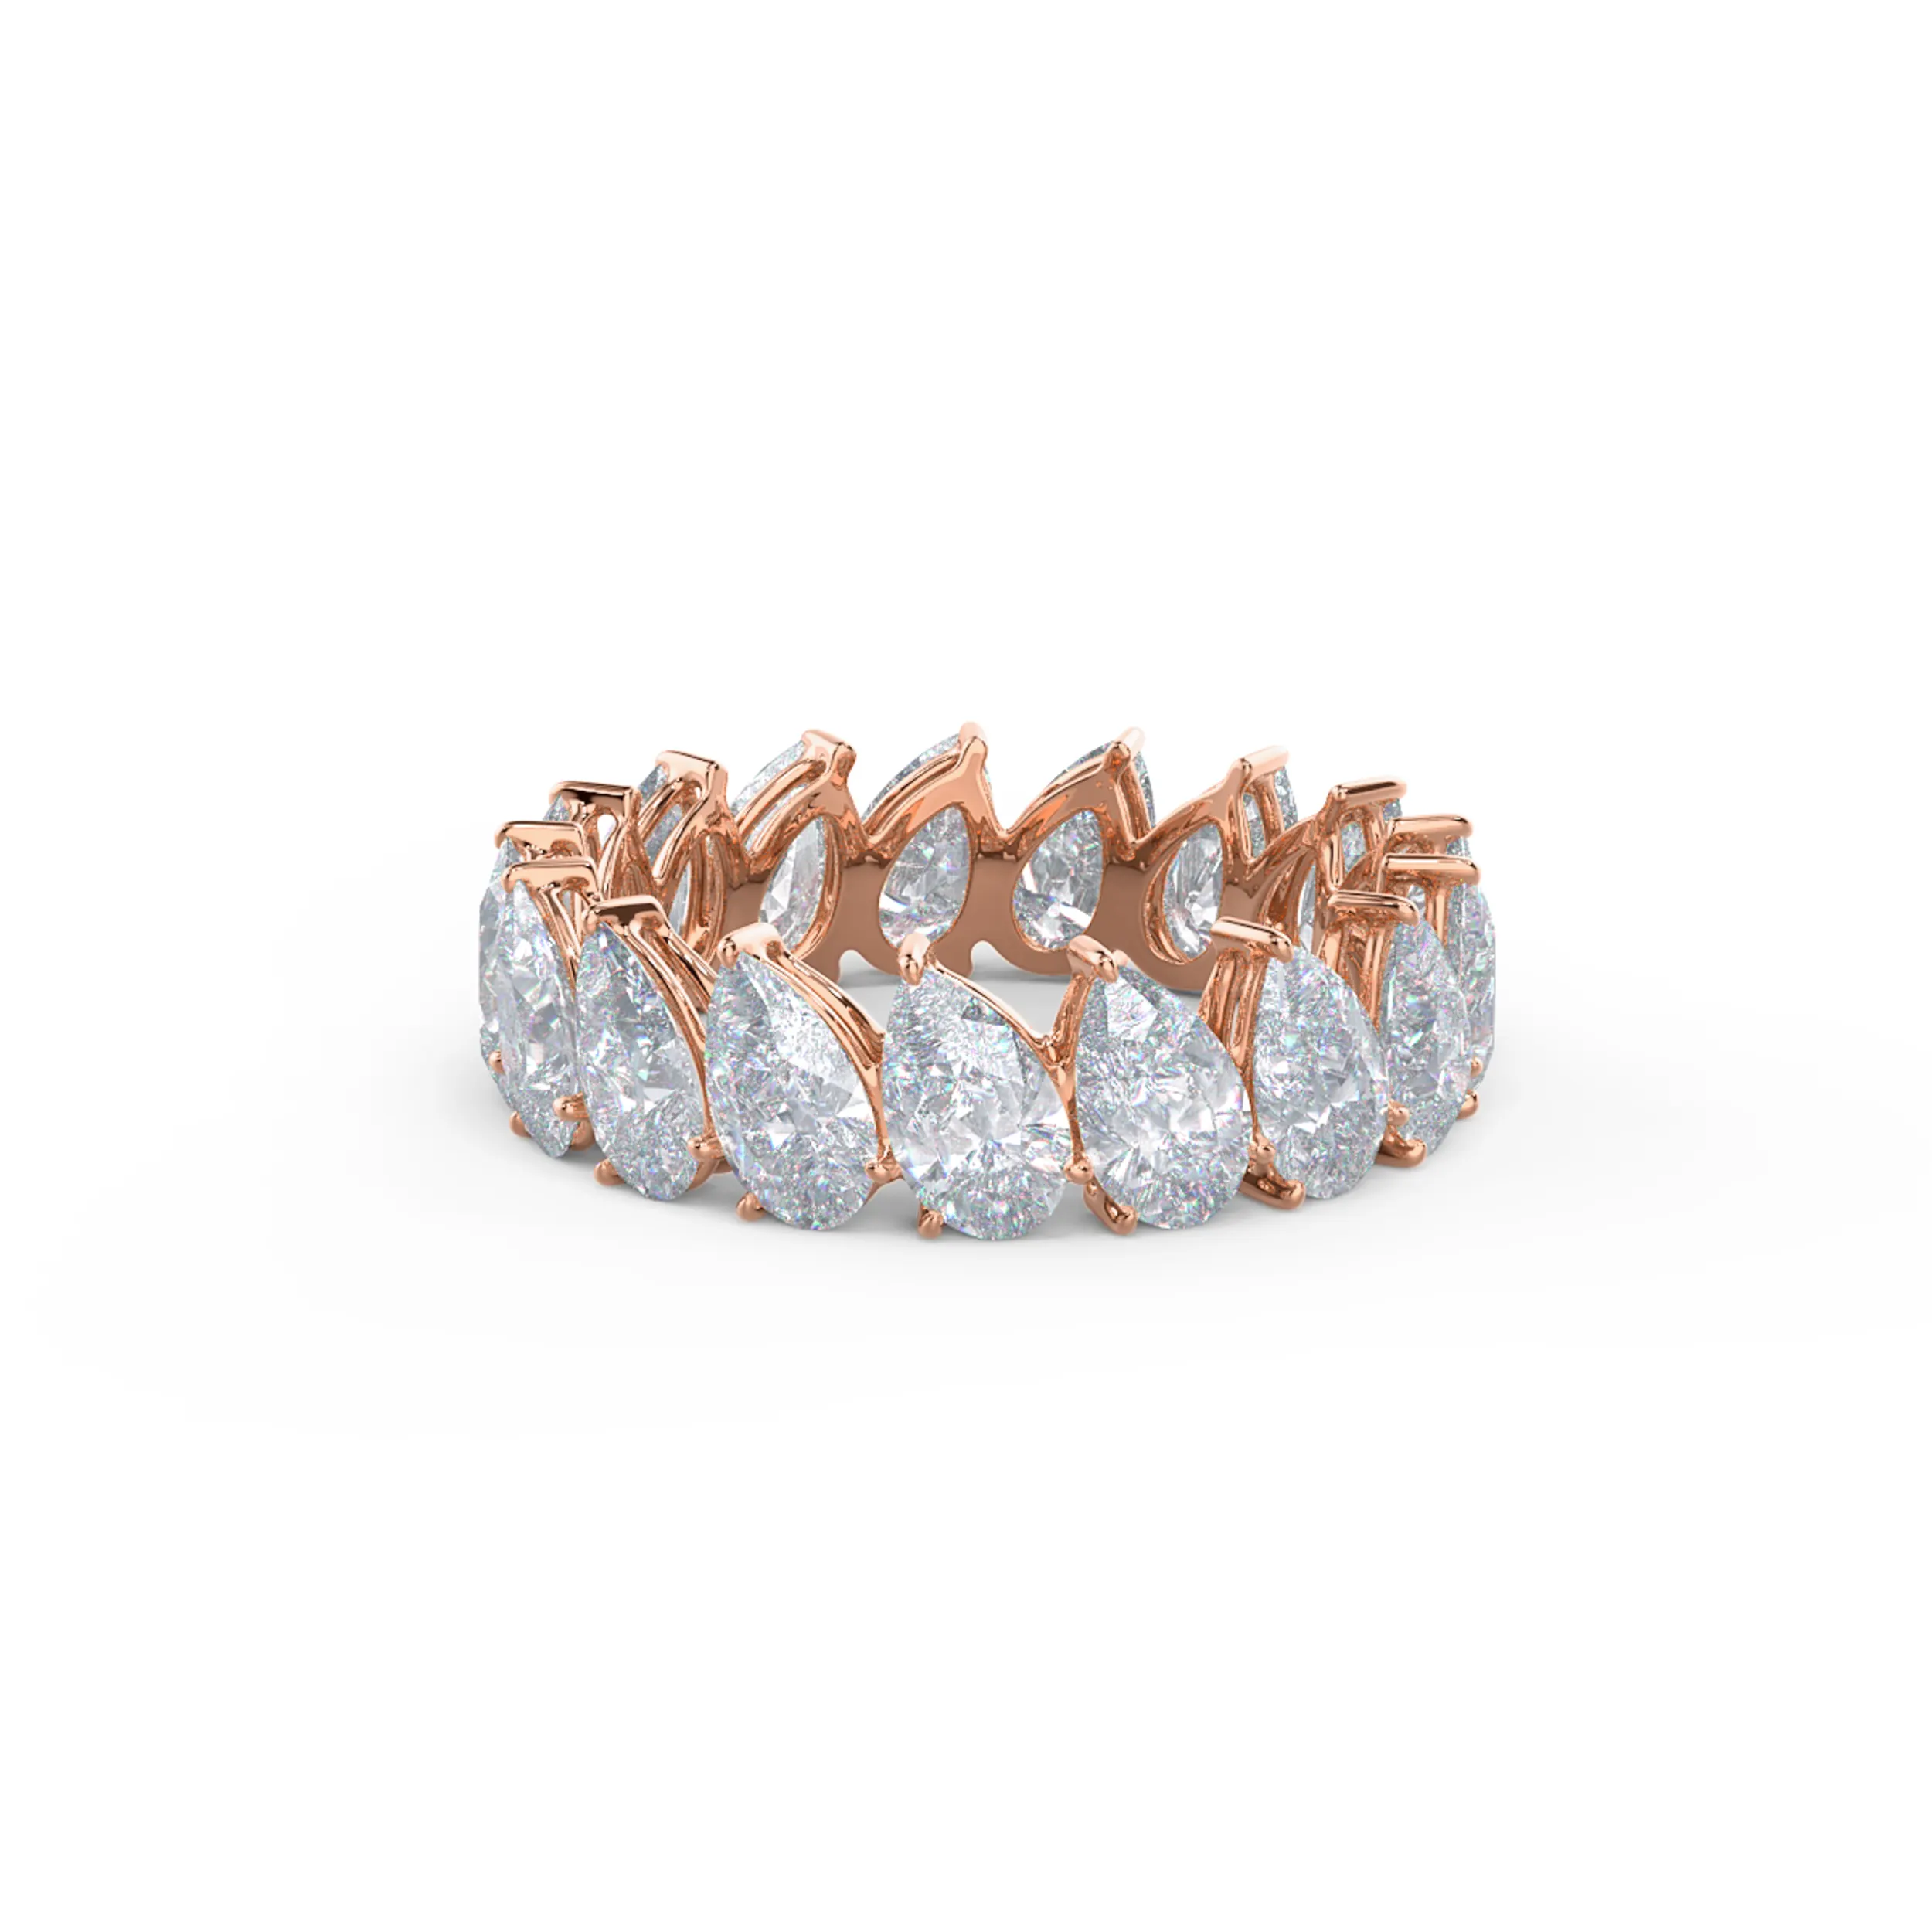 5.0 Carat Diamonds set in 14k Rose Gold Pear Angled Eternity Band (Main View)